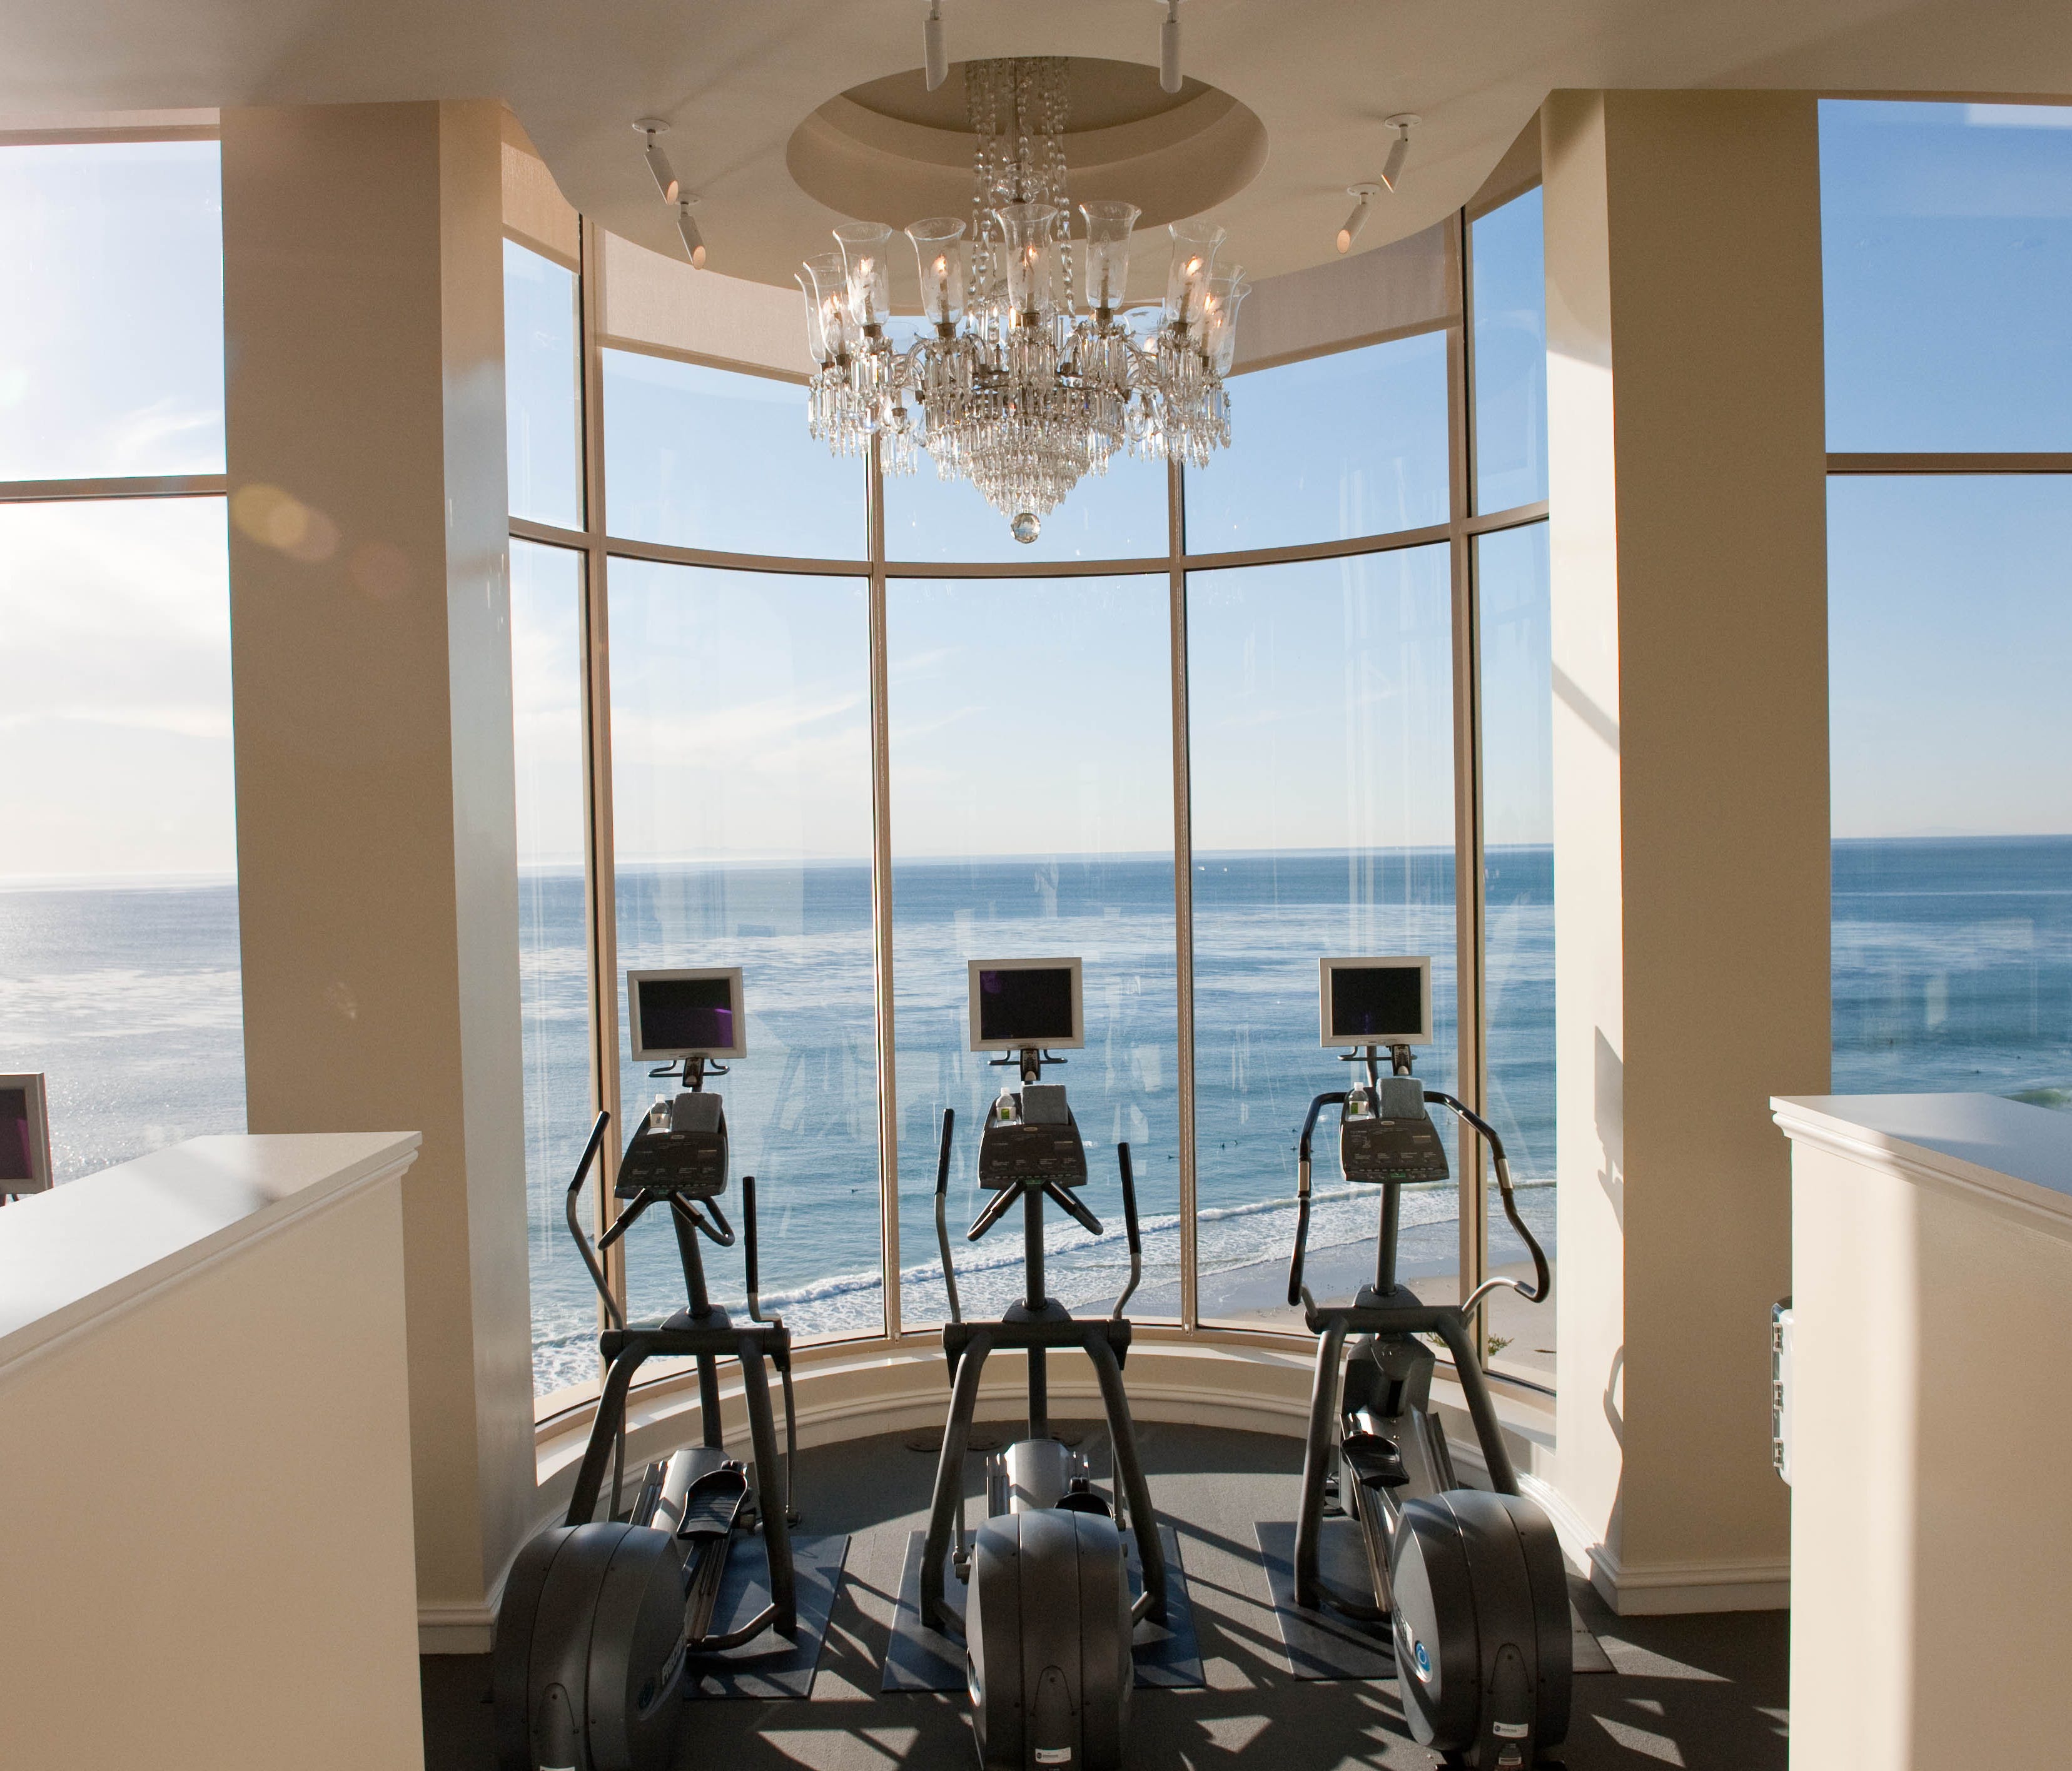 The Ritz-Carlton Laguna Niguel, Orange County, Calif.: Orange County (aka the O.C.) isn't shy about adding a little bling, and this Ritz-Carlton gym follows suit. Orchids the color of Concord grapes greet guests at the entrance, and mirrors trimmed i